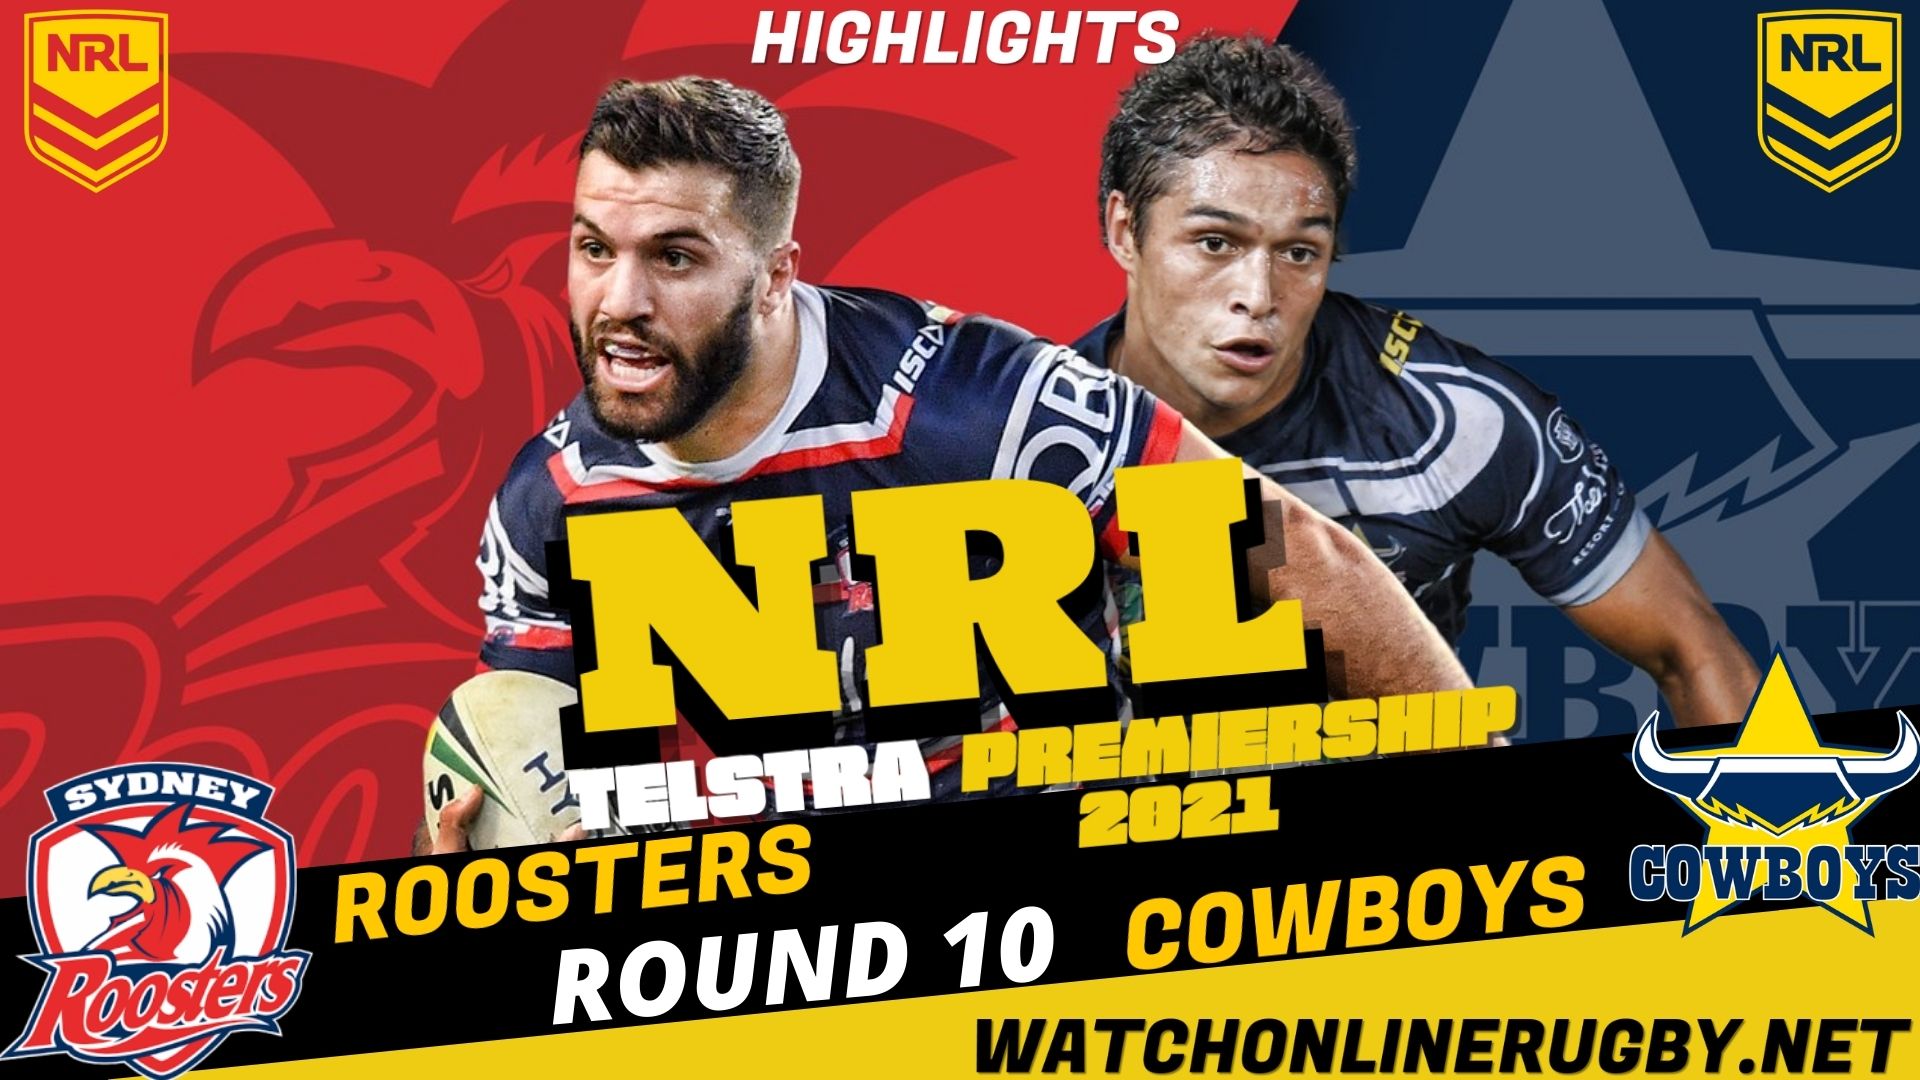 Roosters Vs Cowboys Highlights RD 10 NRL Rugby